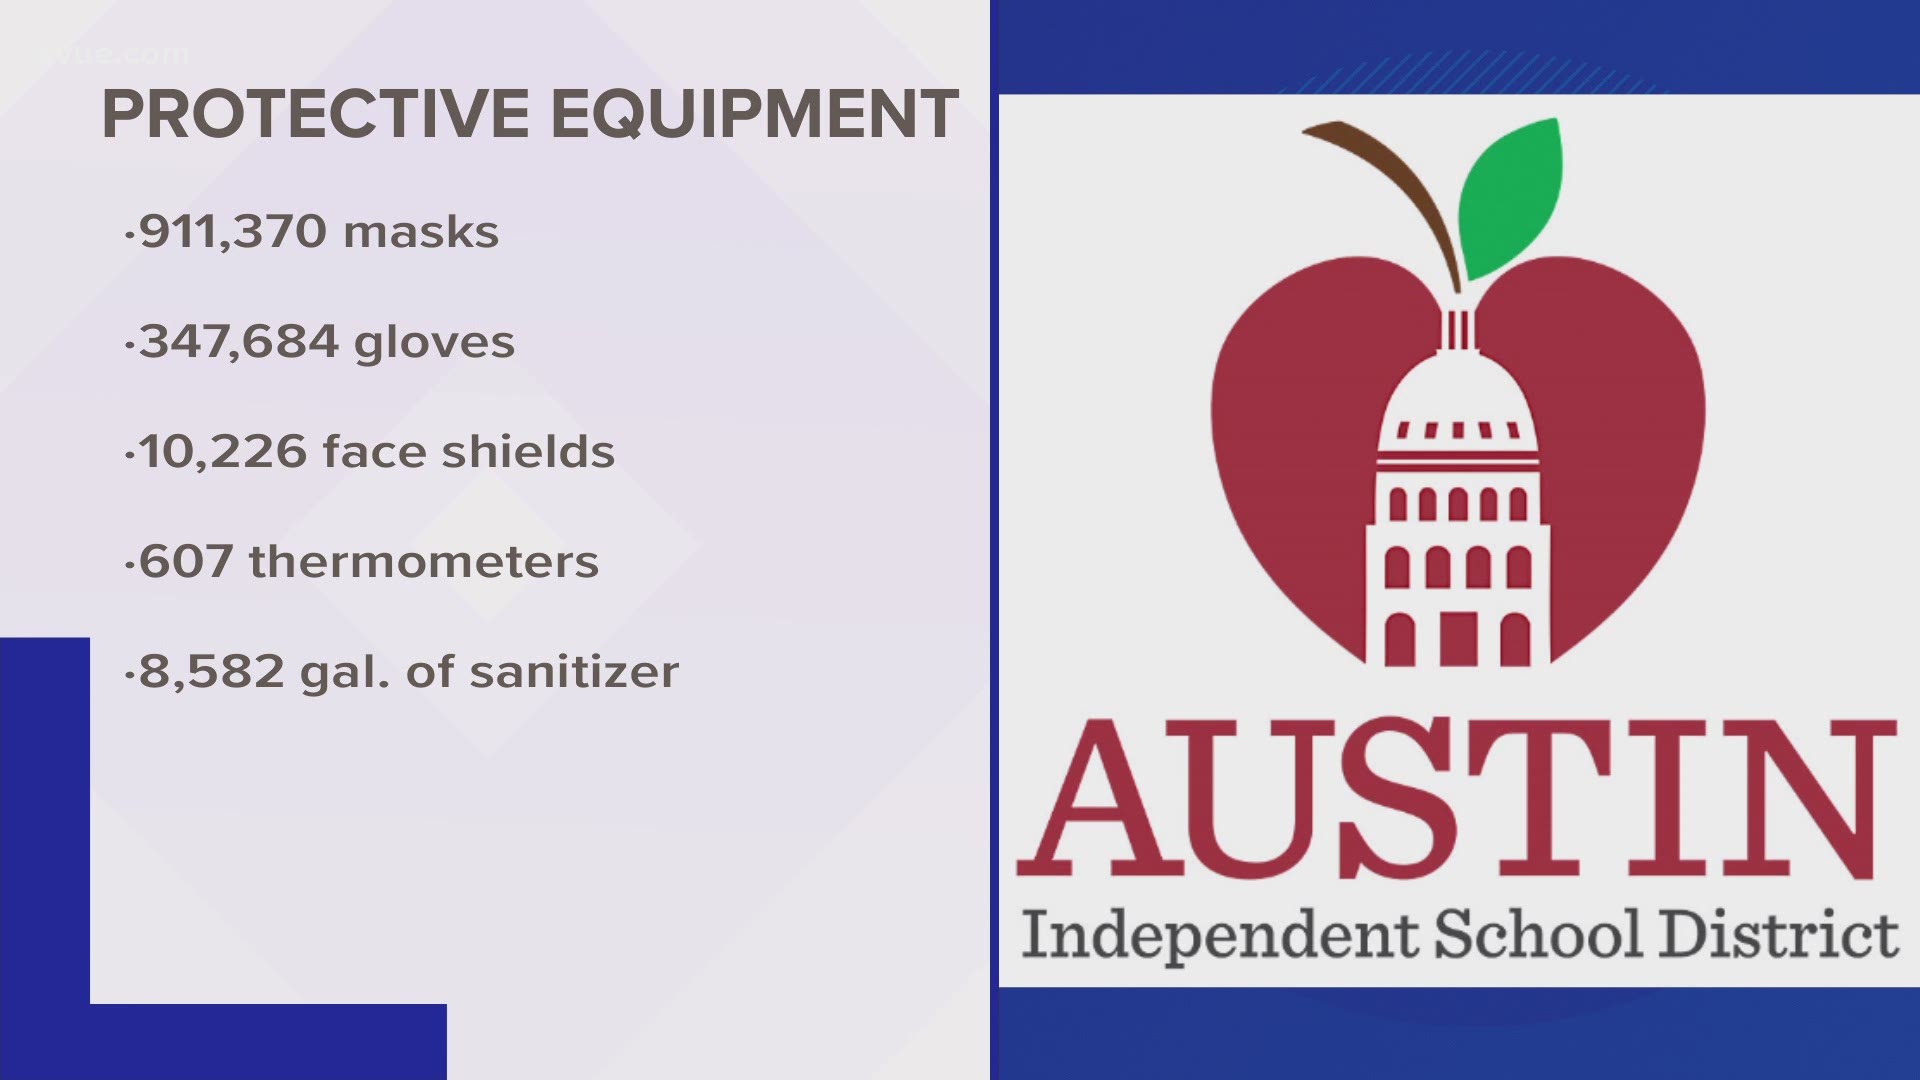 We're only about six weeks from the start of the new school year in Central Texas. Austin ISD is preparing for what that will mean amid COVID-19.